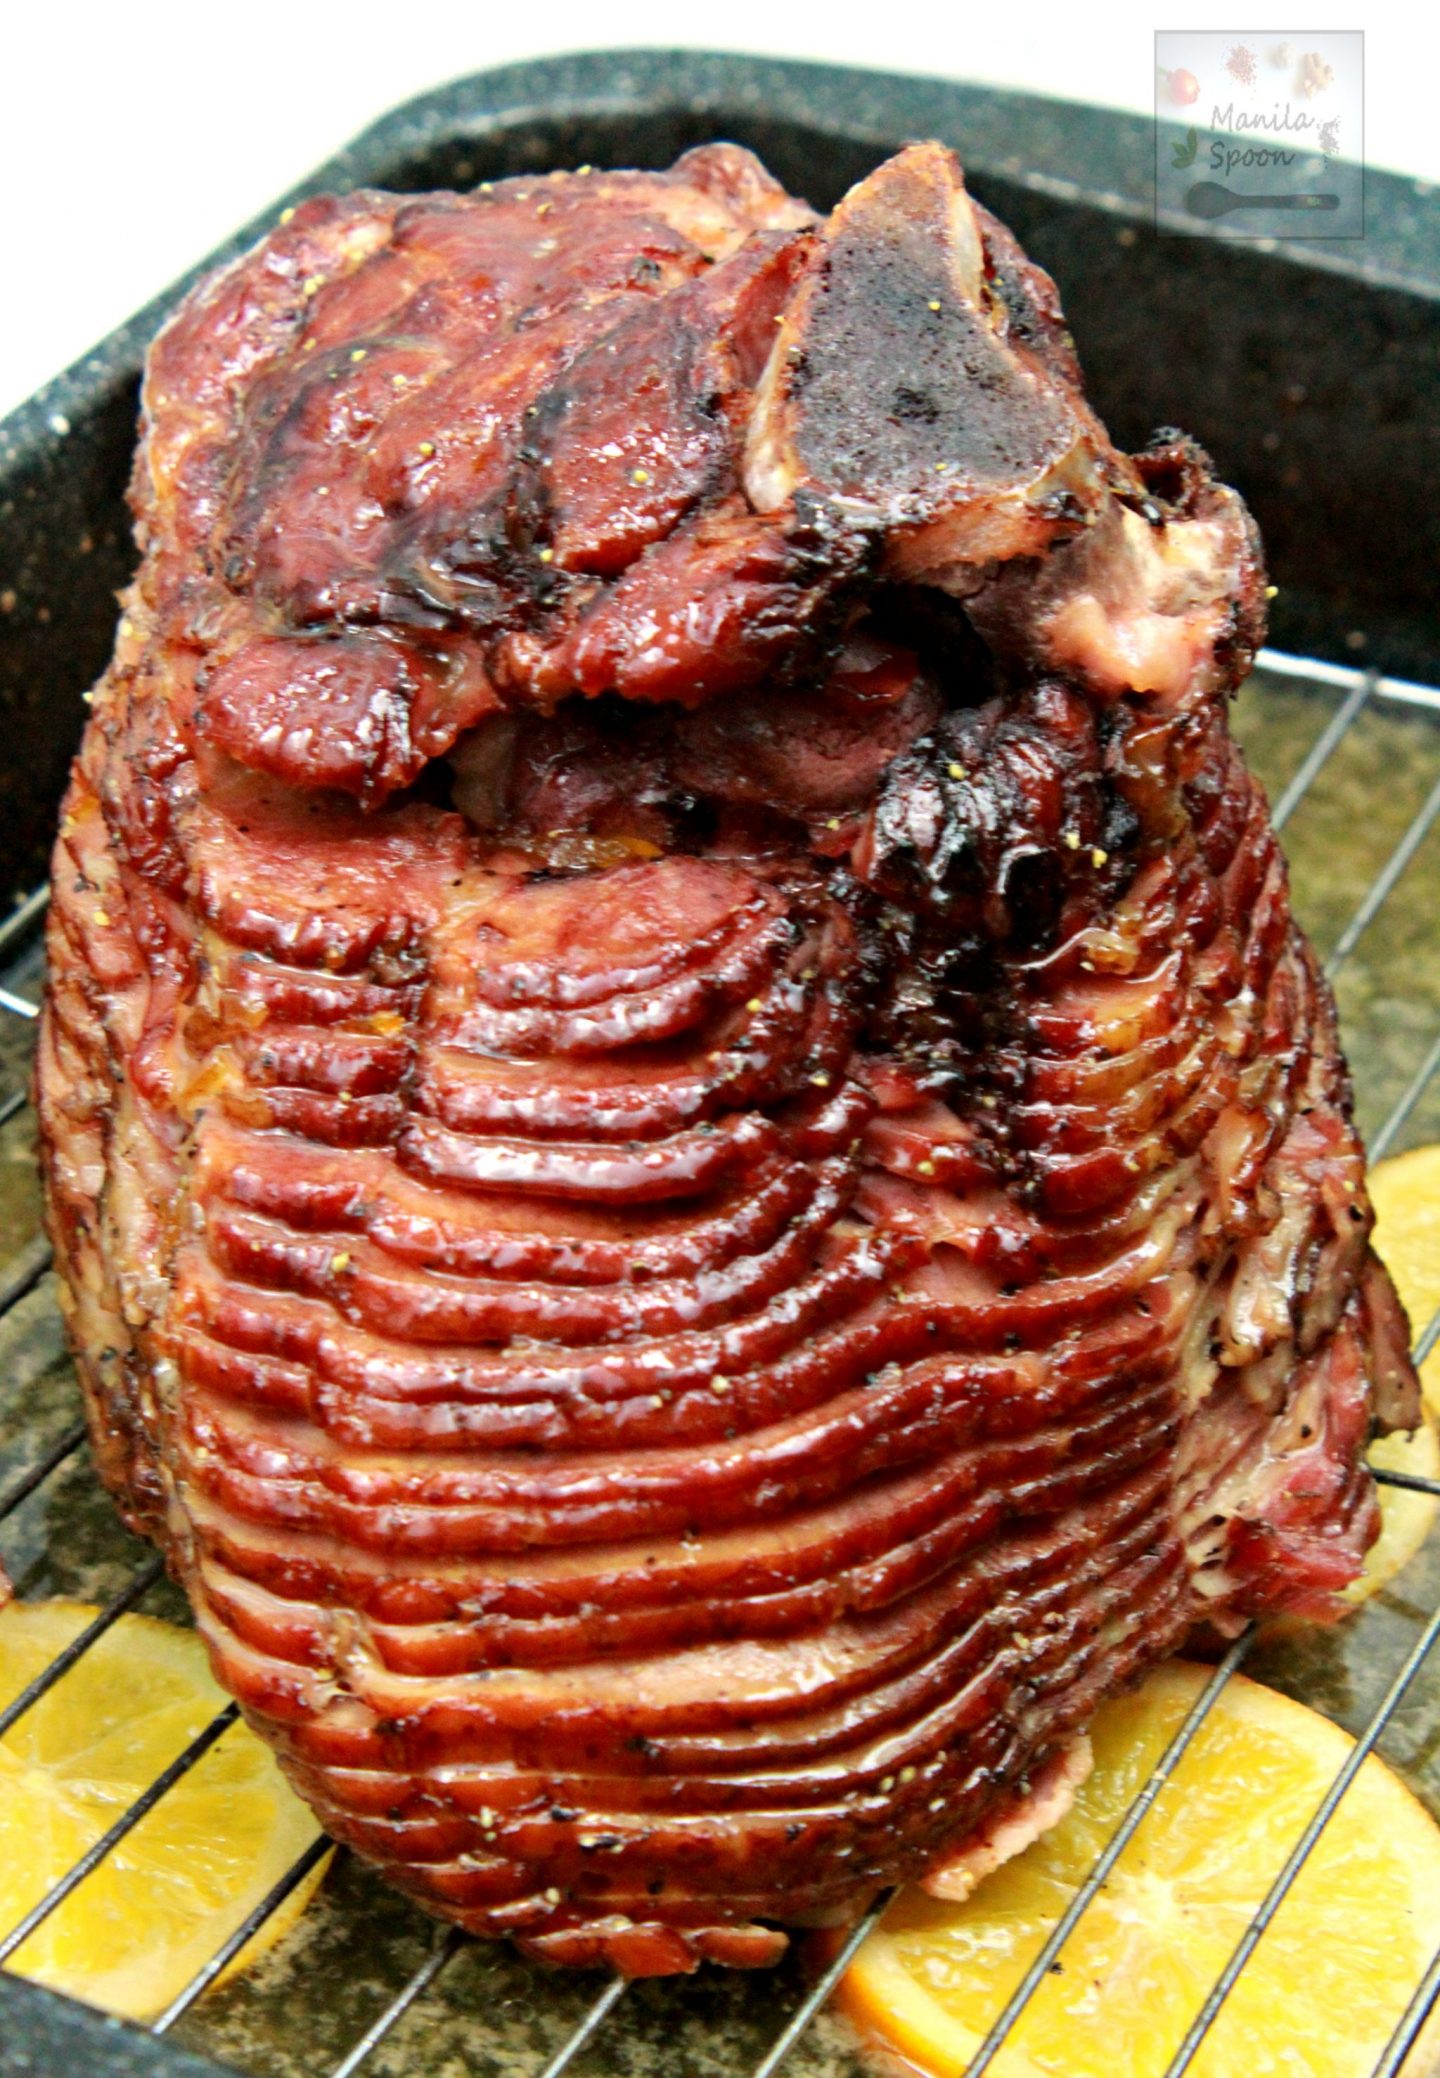 A delicious and easy glaze to jazz up your favorite ham this Easter or for any holiday. Honey and marmalade with some dijon mustard gives this glaze such a distinct and tasty flavor!